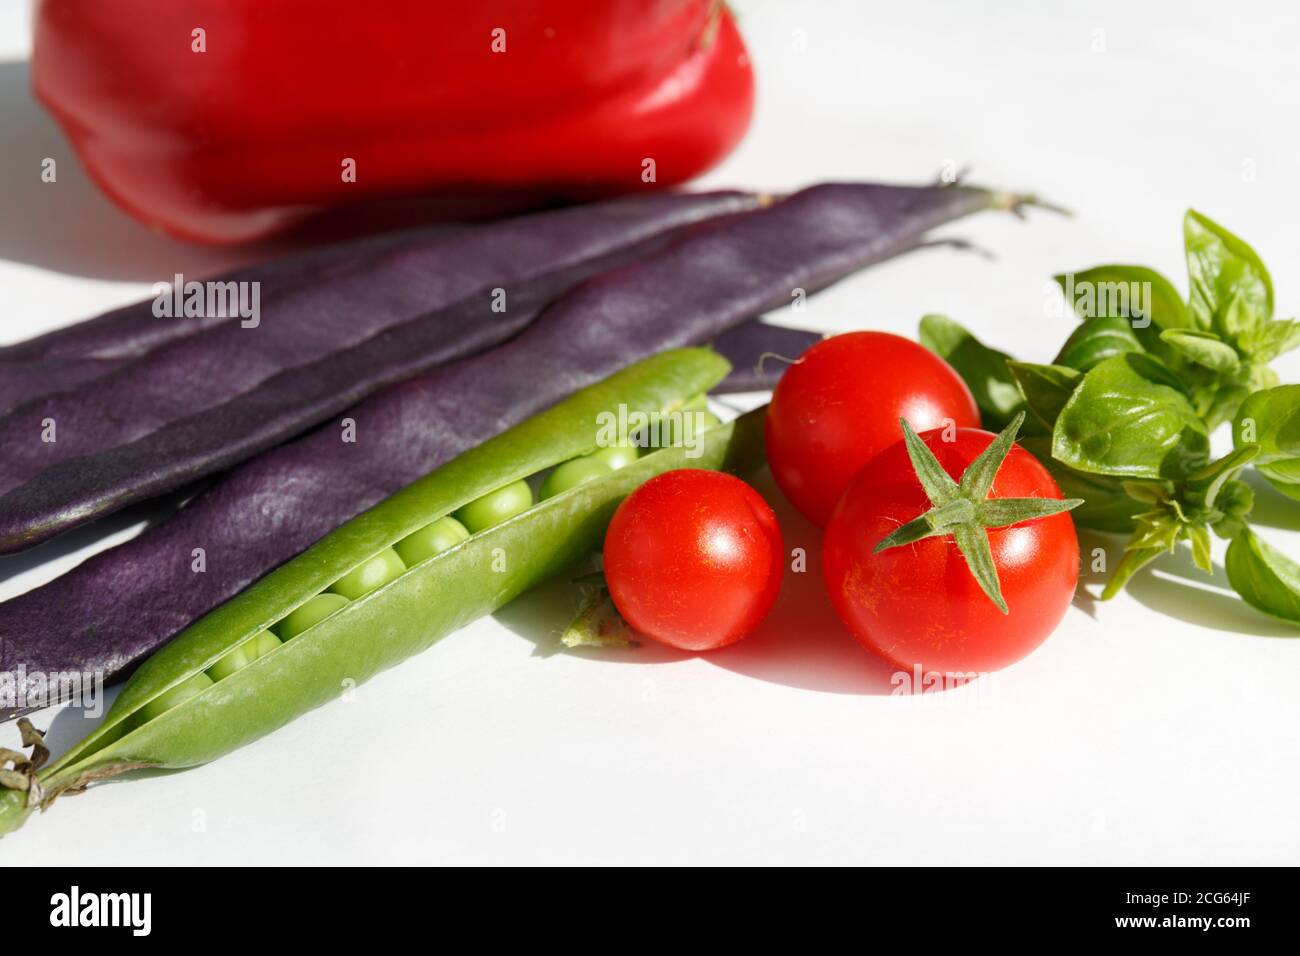 Cherry tomatoes, green Basil leaves, an open pea pod, purple bean pods, and red bell pepper. Seasonal vegetables on a white background. Autumn harvest Stock Photo